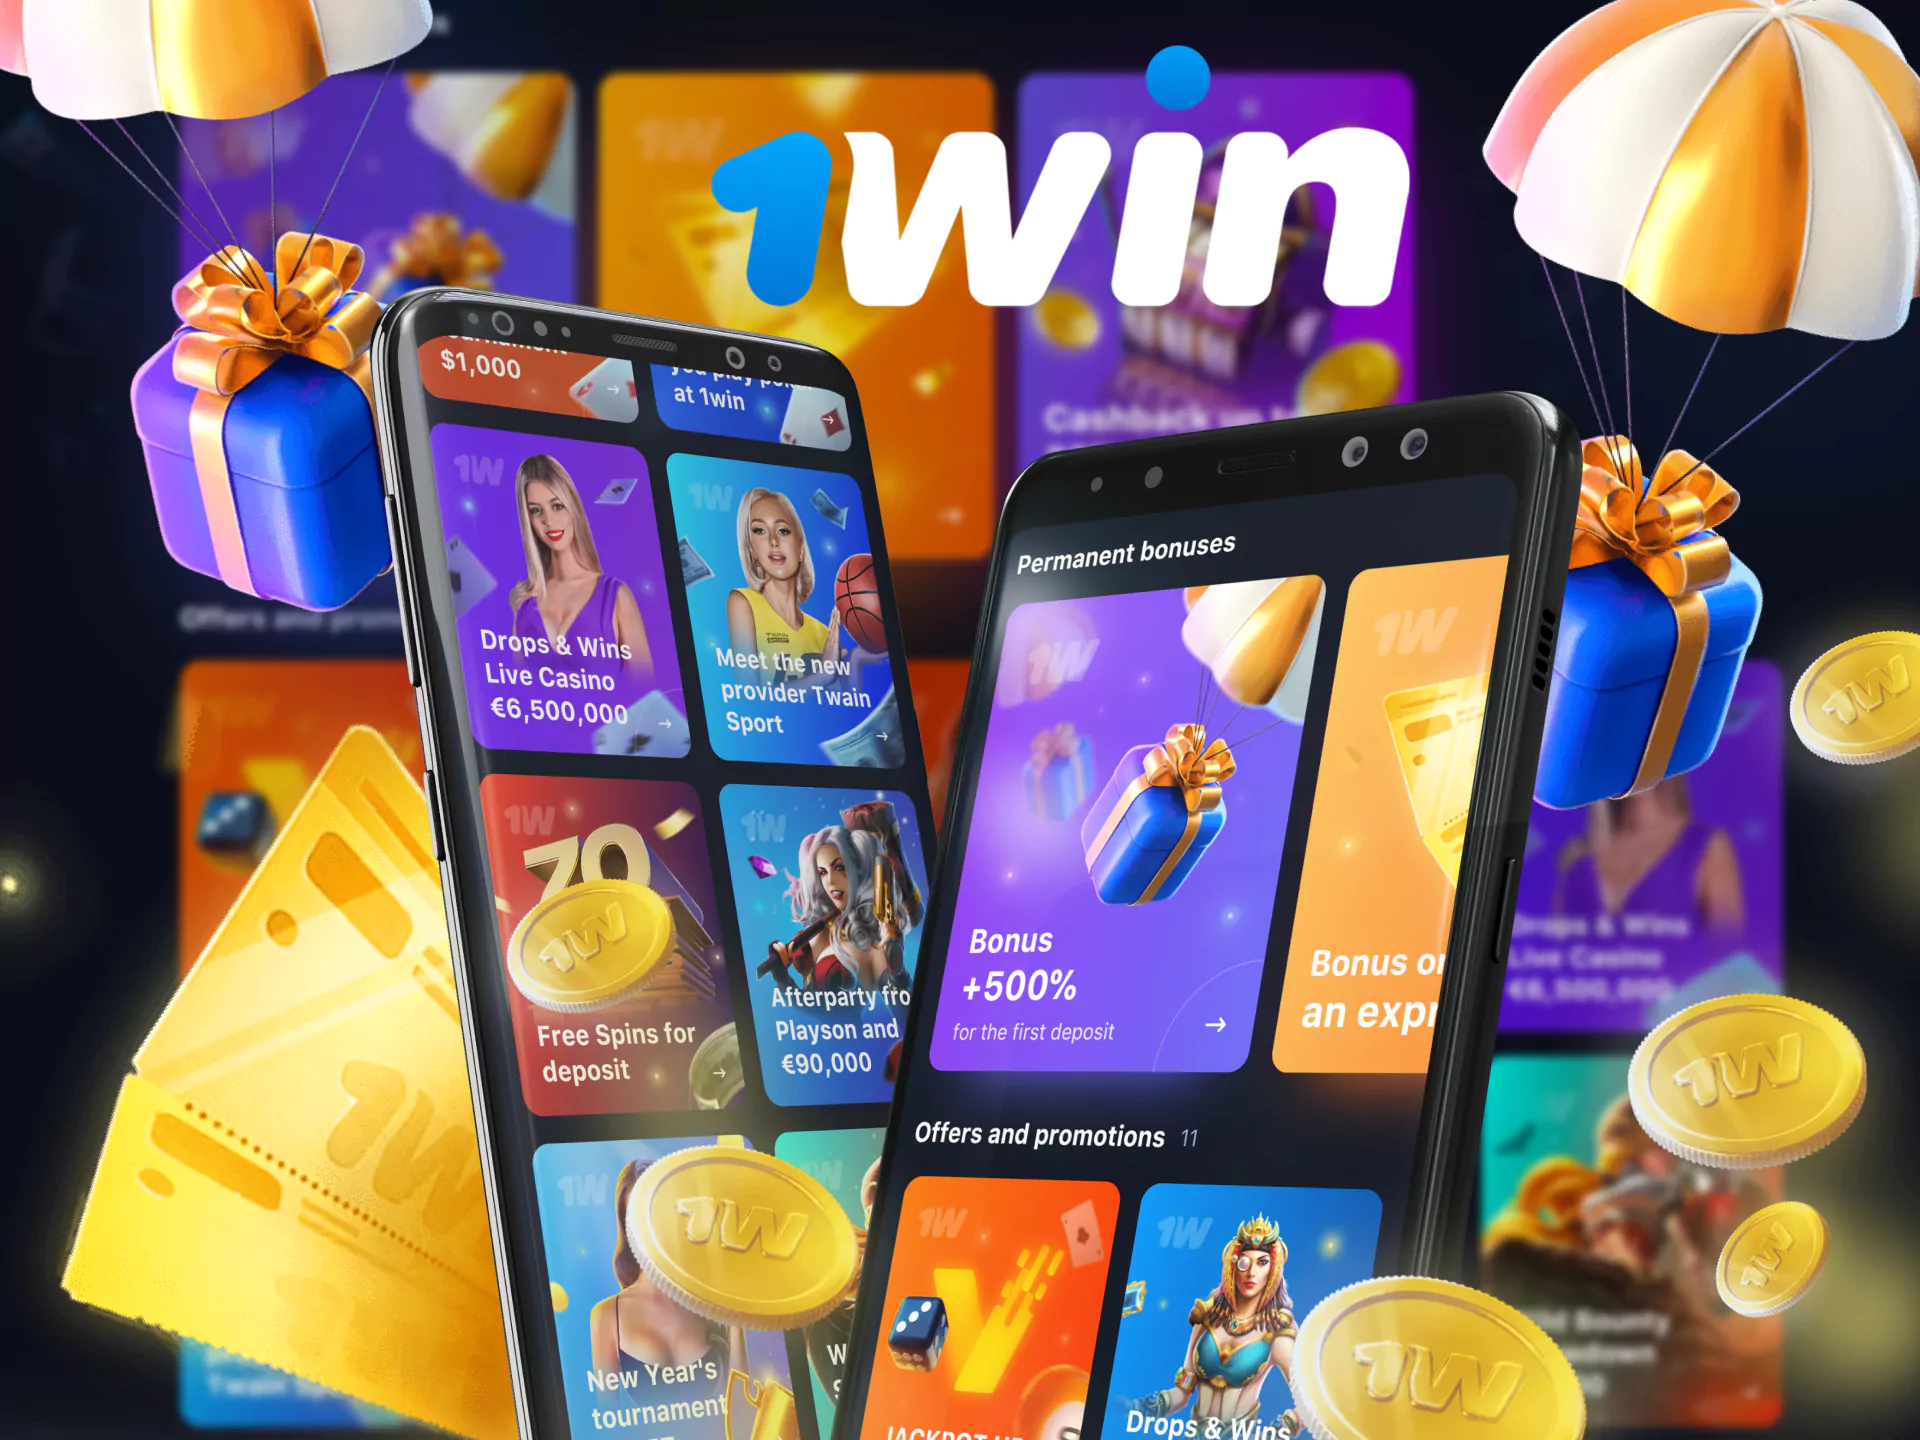 Play games from your mobile phone and get special bonuses from 1Win.